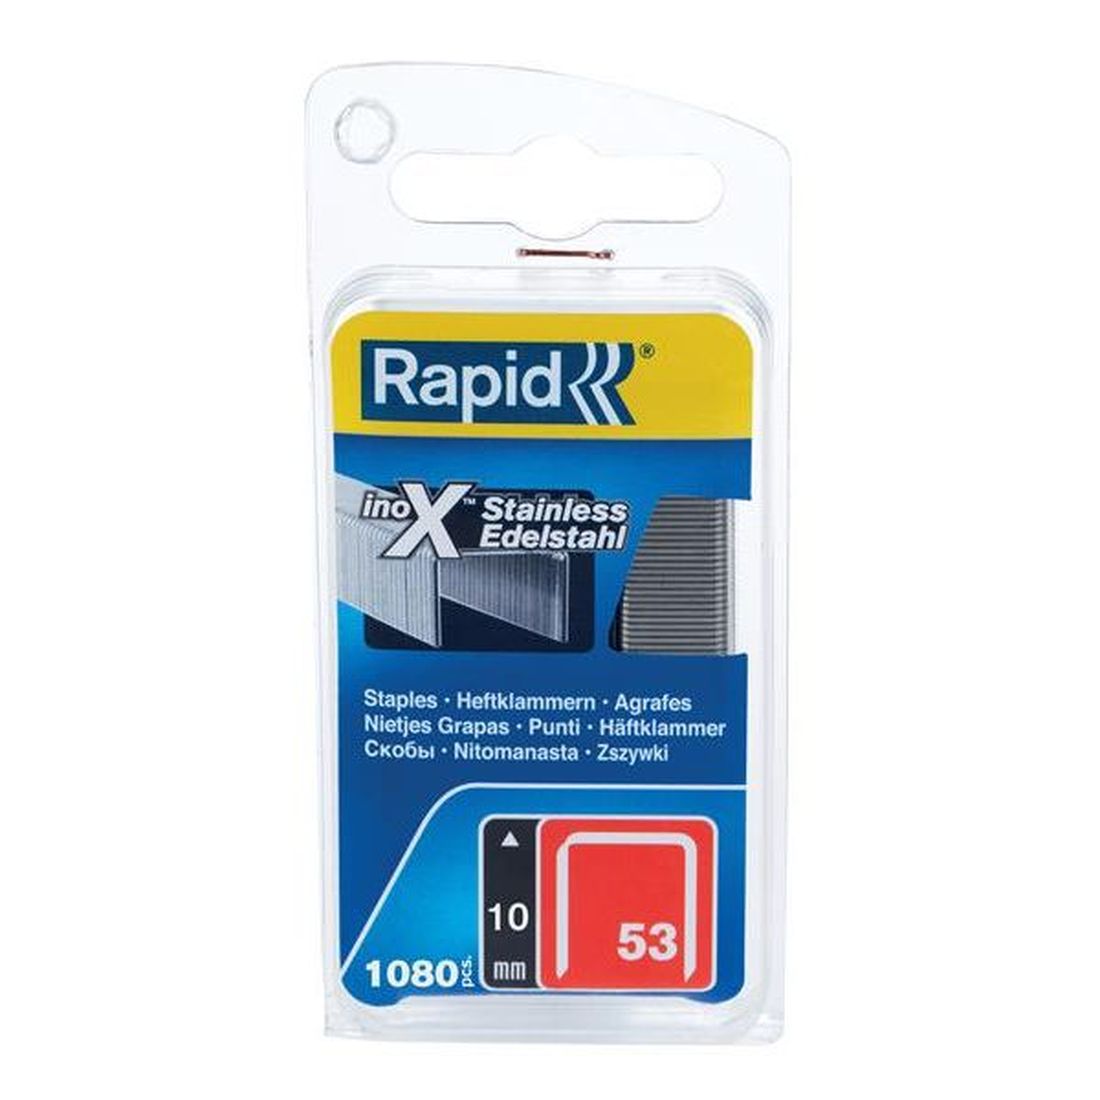 Rapid 53/10B 10mm Stainless Steel Fine Wire Staples (Box 1080)                        